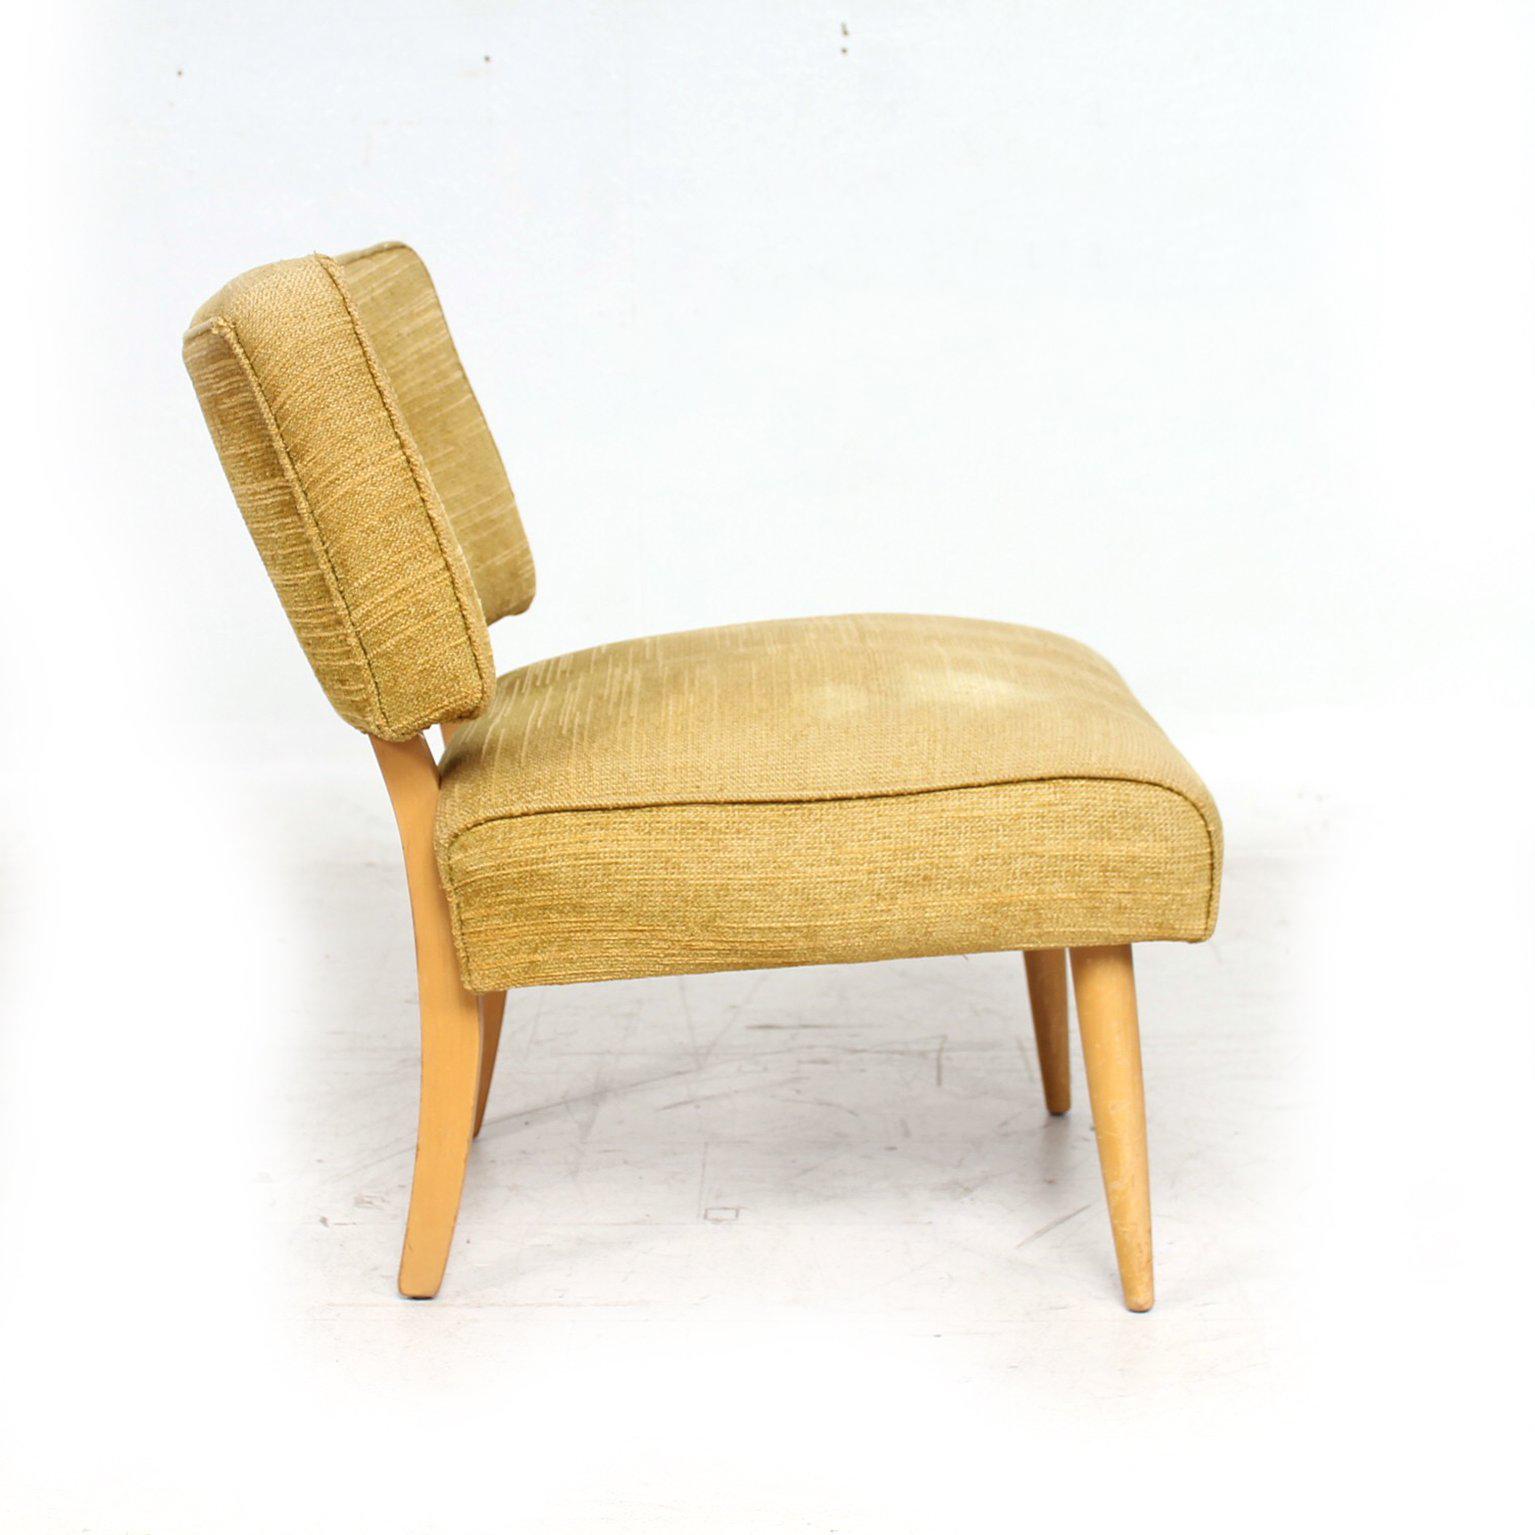 American Sassy Blonde Slipper Chair Charming 1950s Billy Haines Modern Side Seat